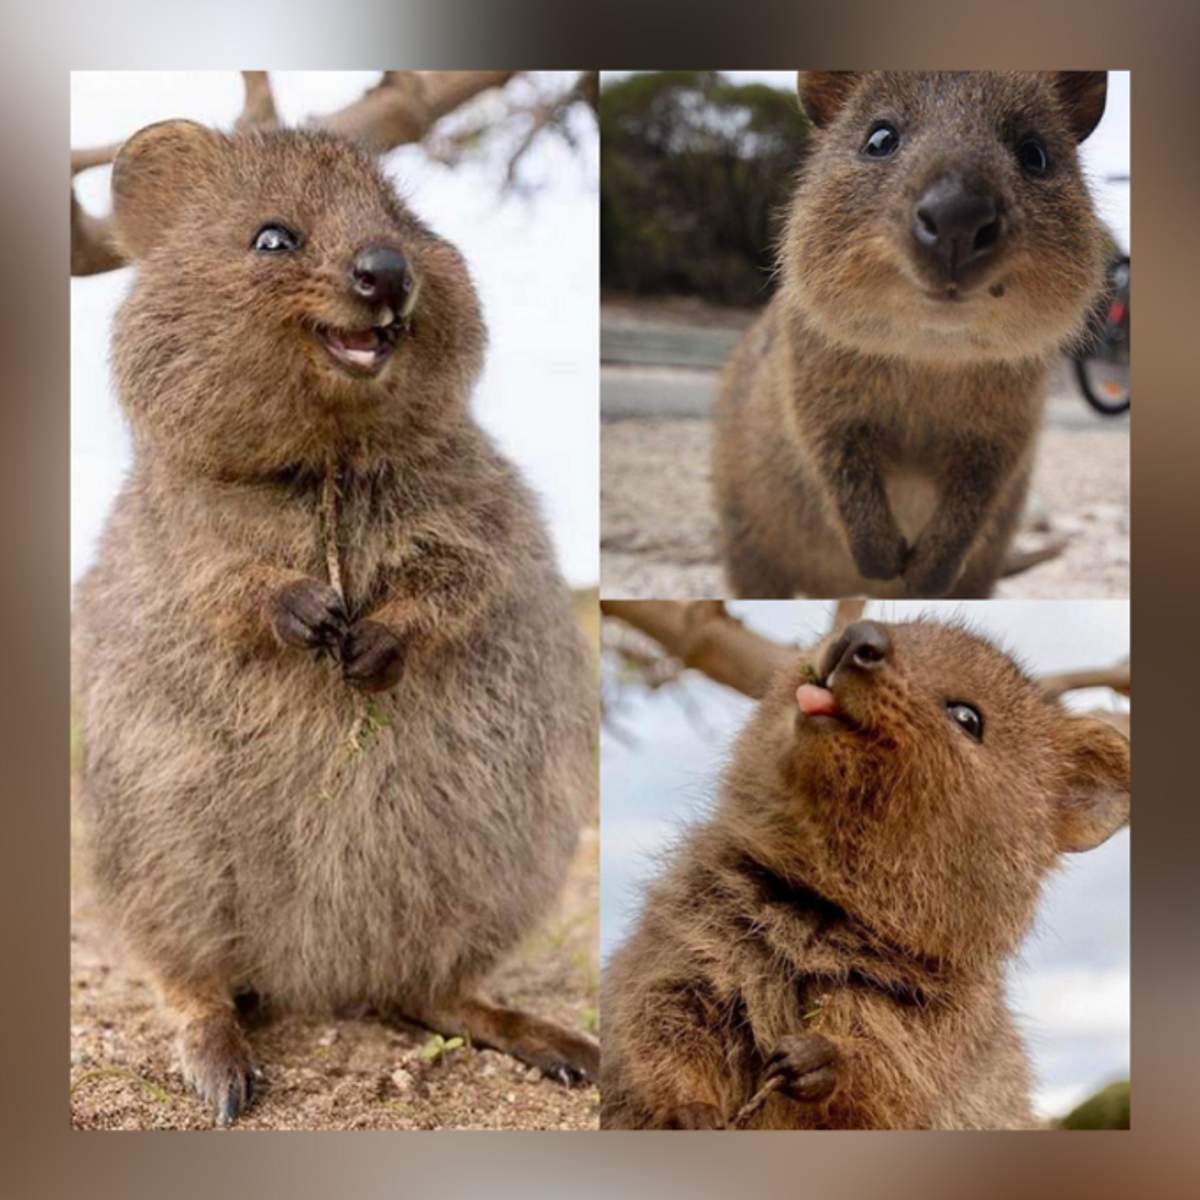 Is the Quokka a Real Animal? | Snopes.com